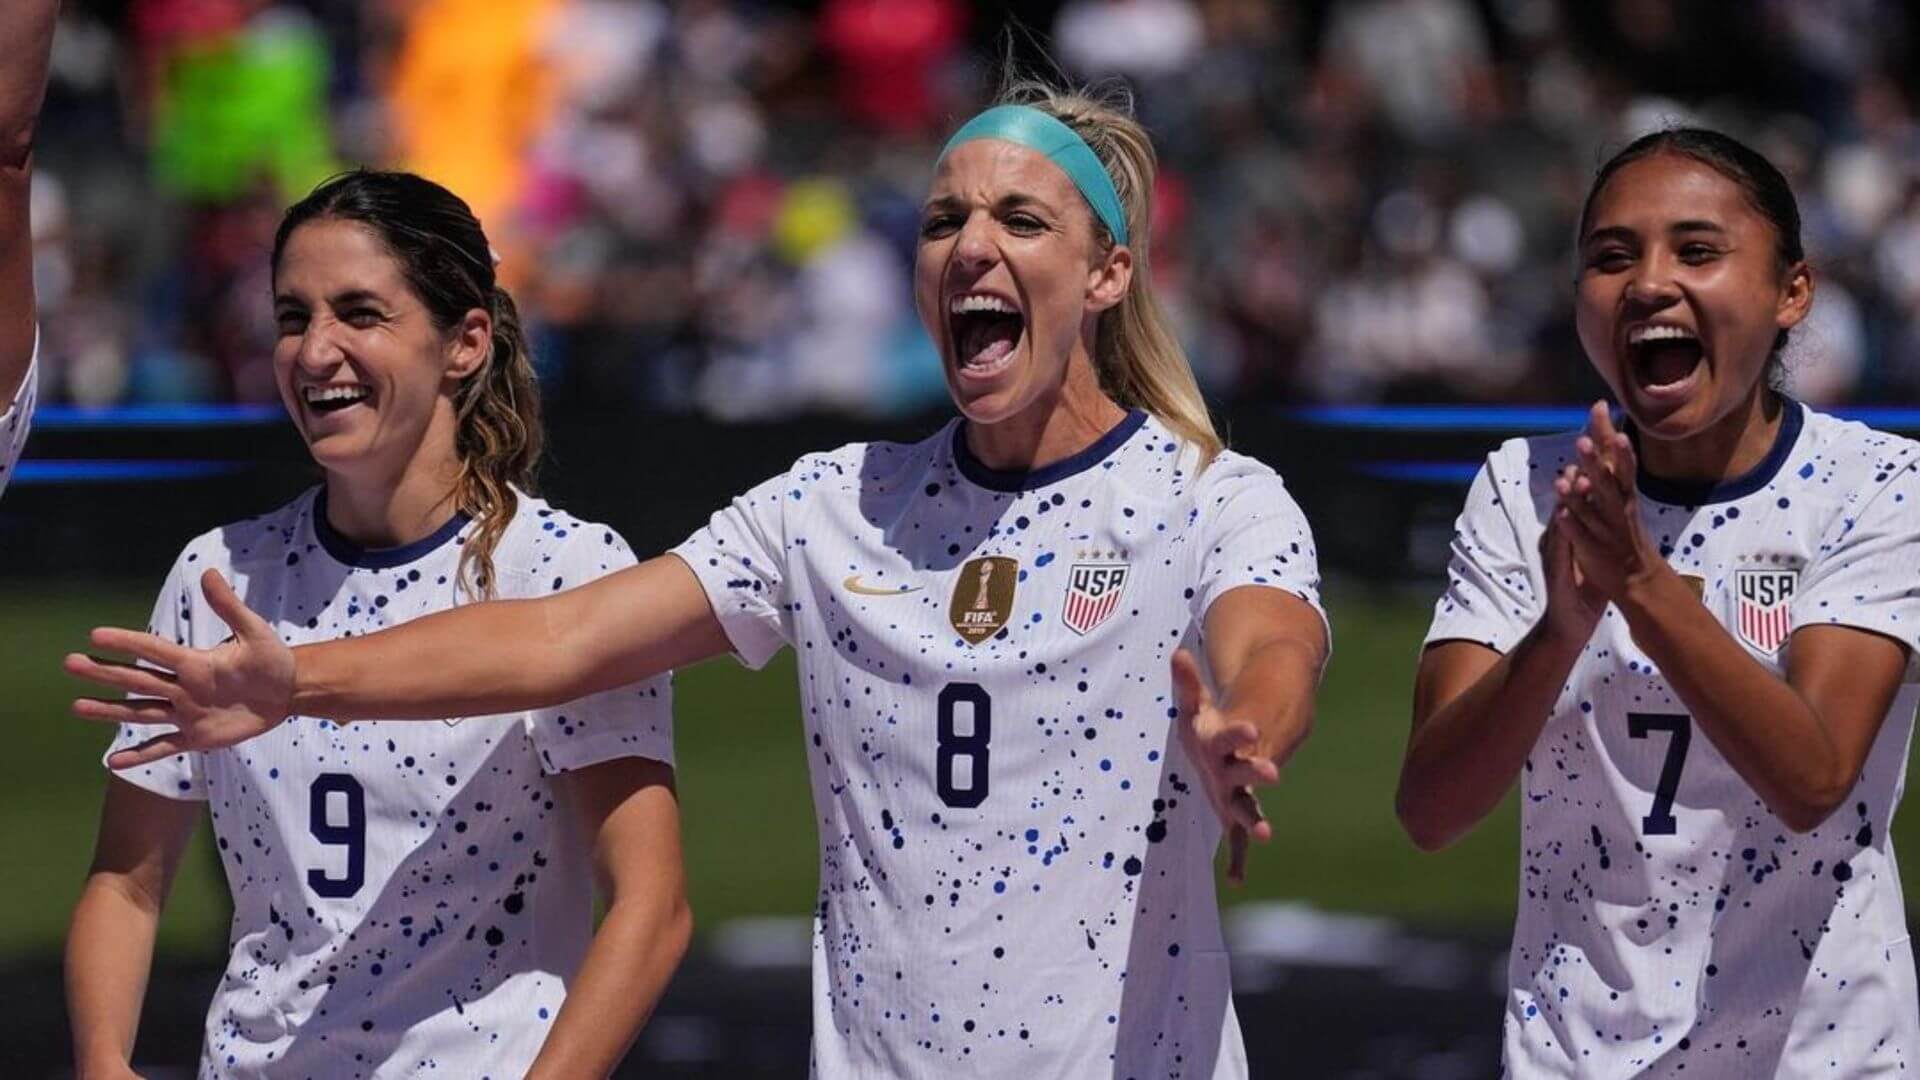 The USWNT World Cup jerseys for 2023